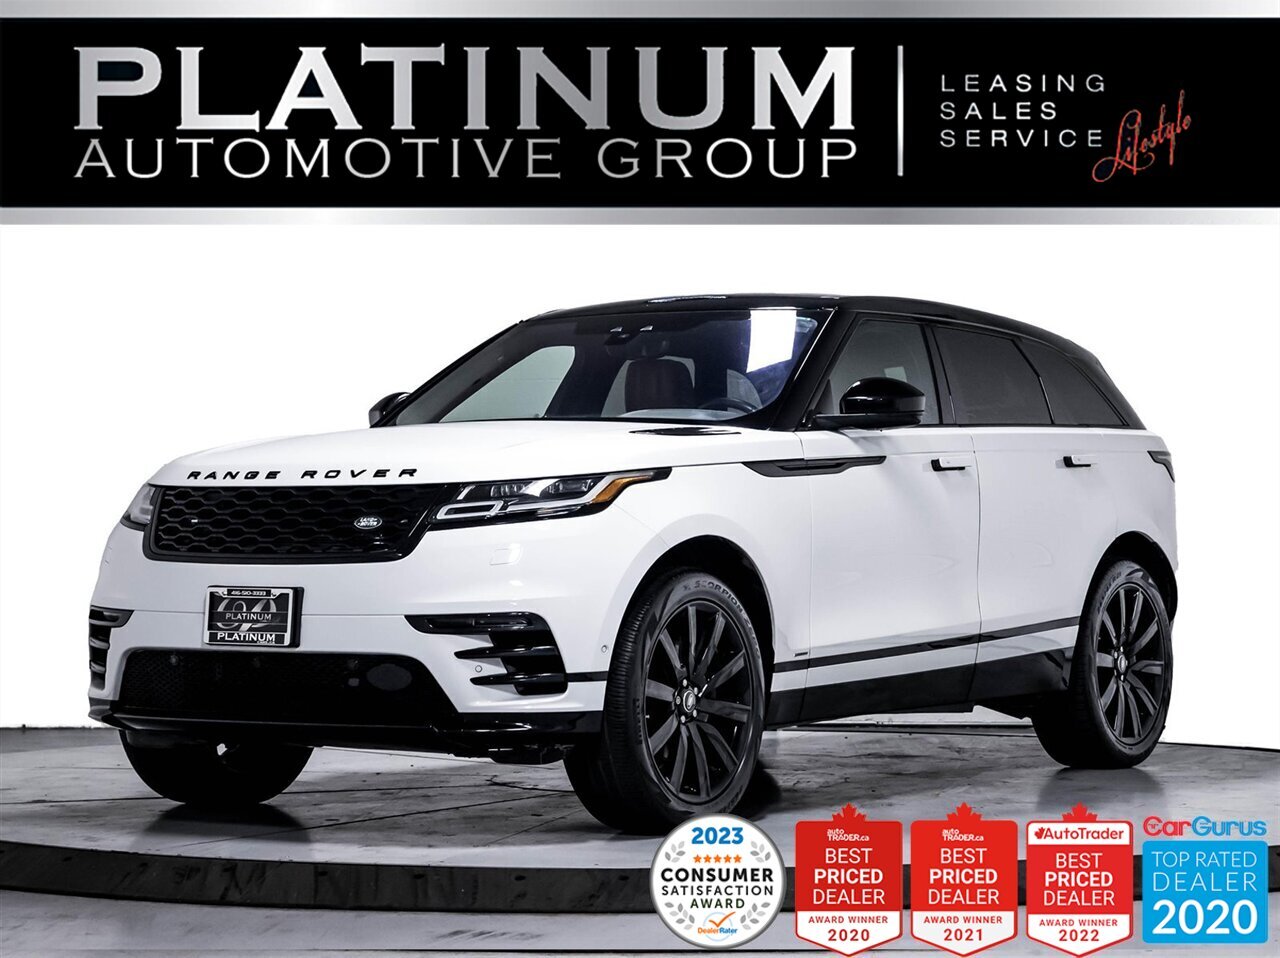 2019 Land Rover Range Rover Velar P300 R-Dynamic HSE,AWD,HEATED/COOLED SEATS,MERIDIA